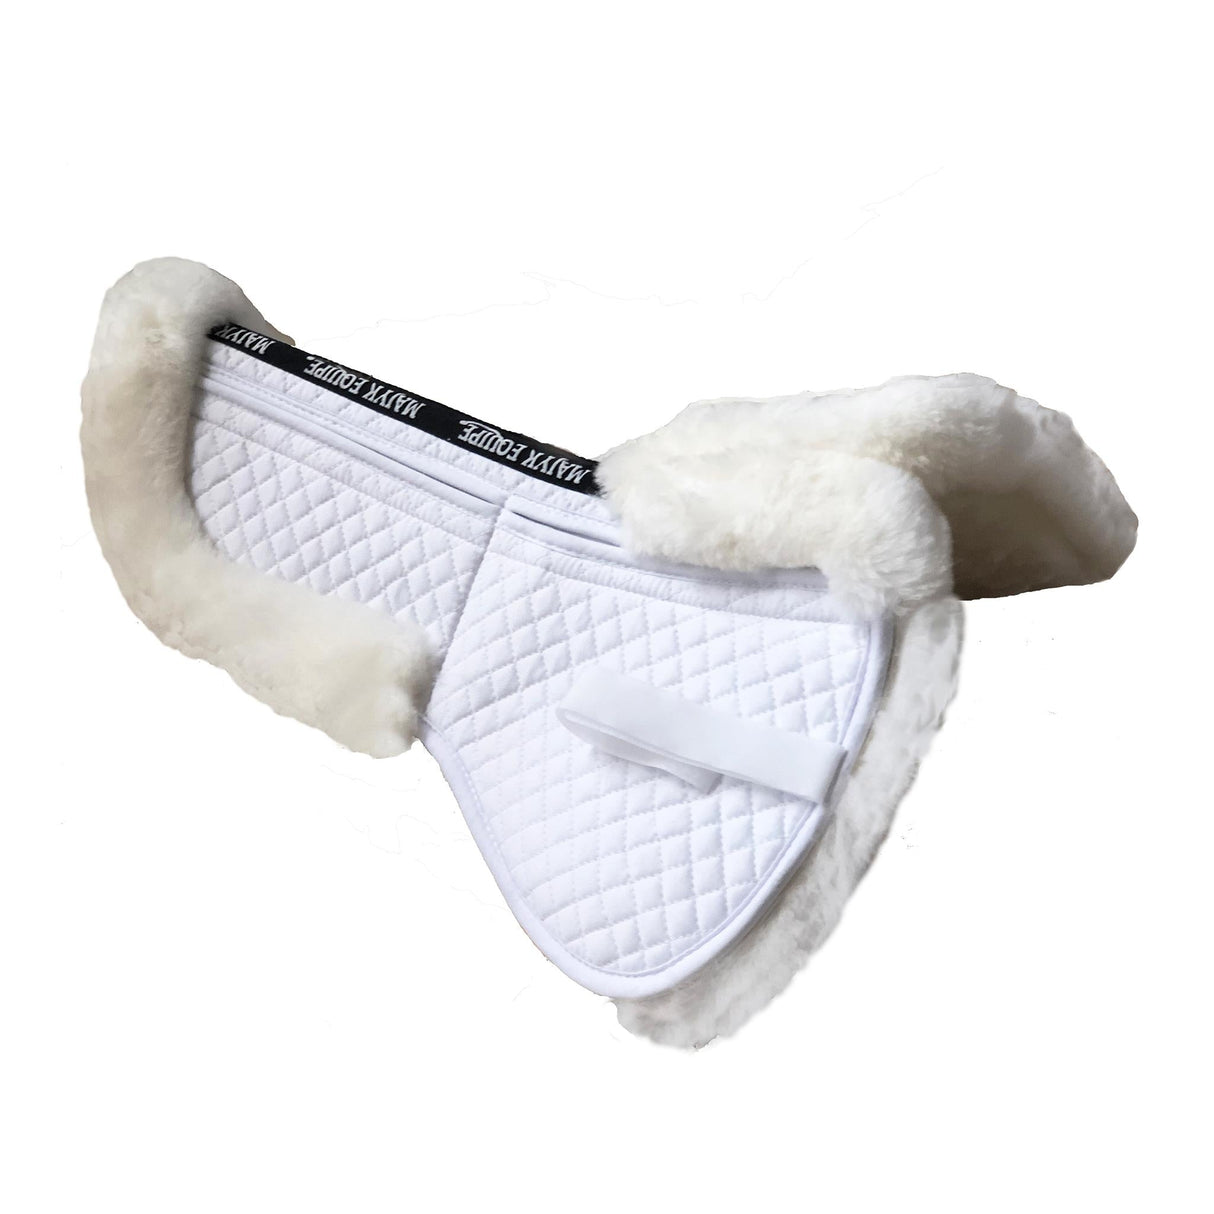 Majyk Equipe Half Pad Correction Fleece with Wither Relief/ Impact Shims White/White Fleece